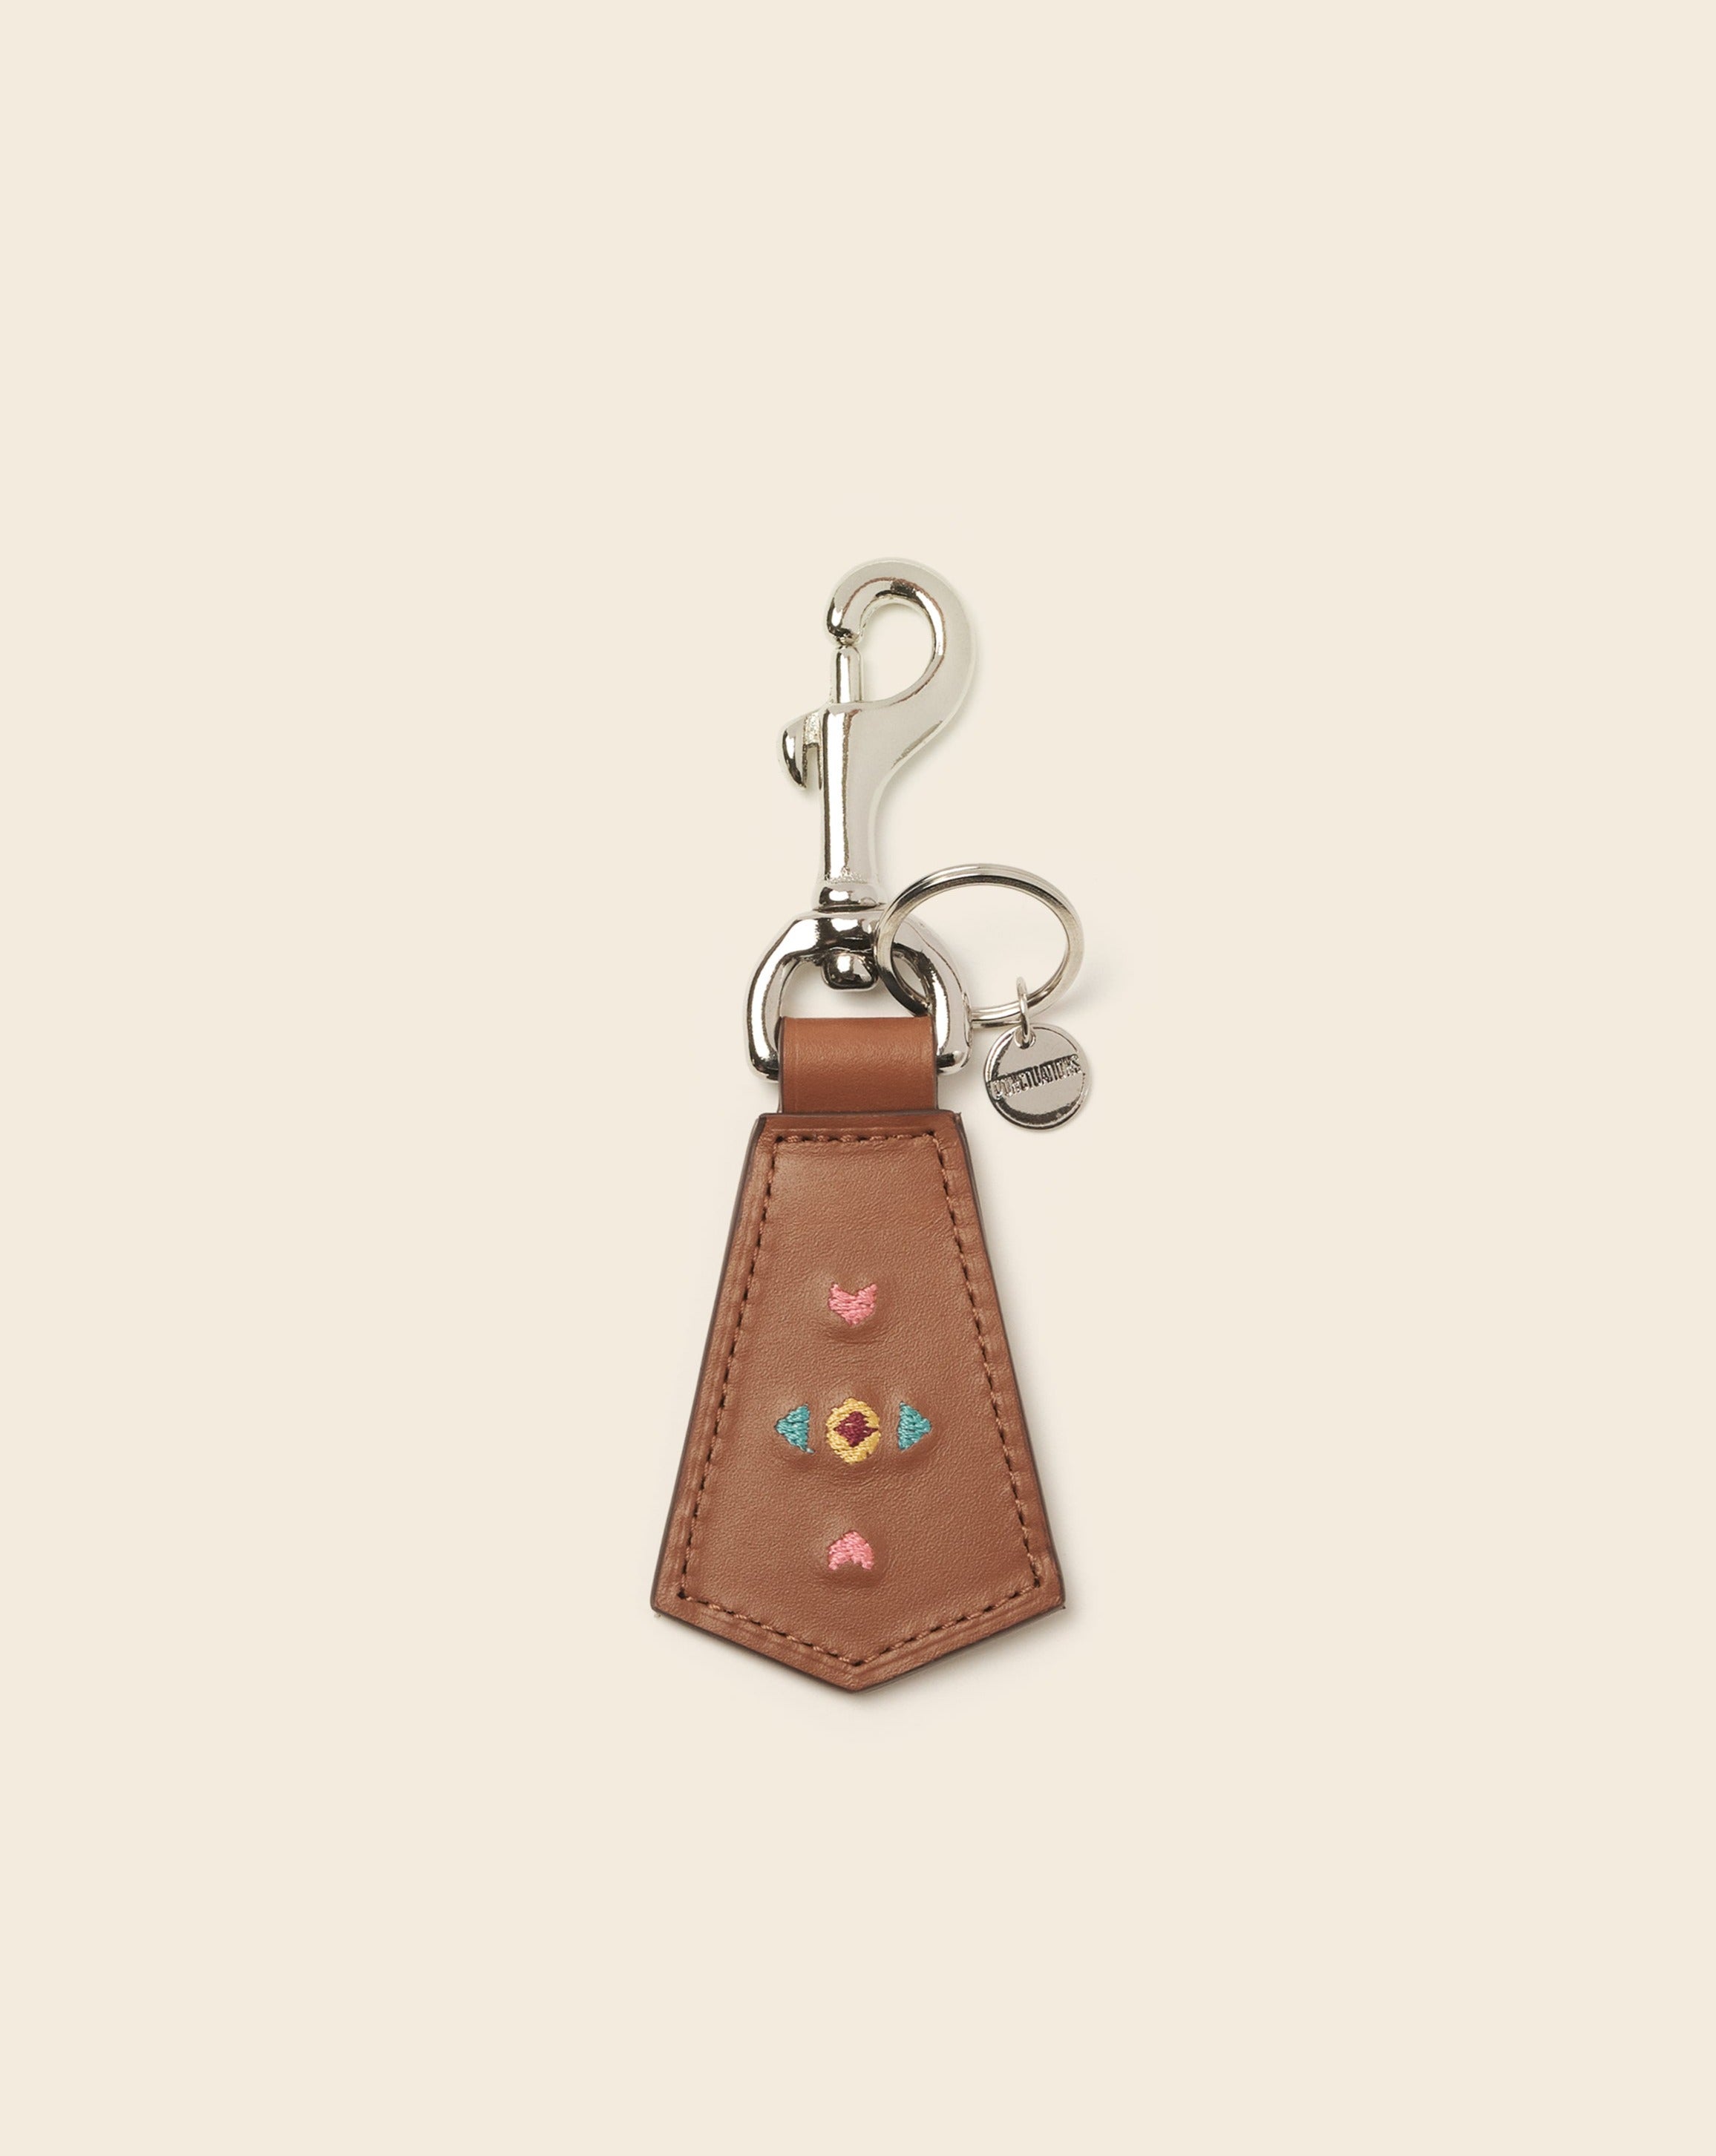 IDAHO - Key ring - Gold leather & multicolored embroidery